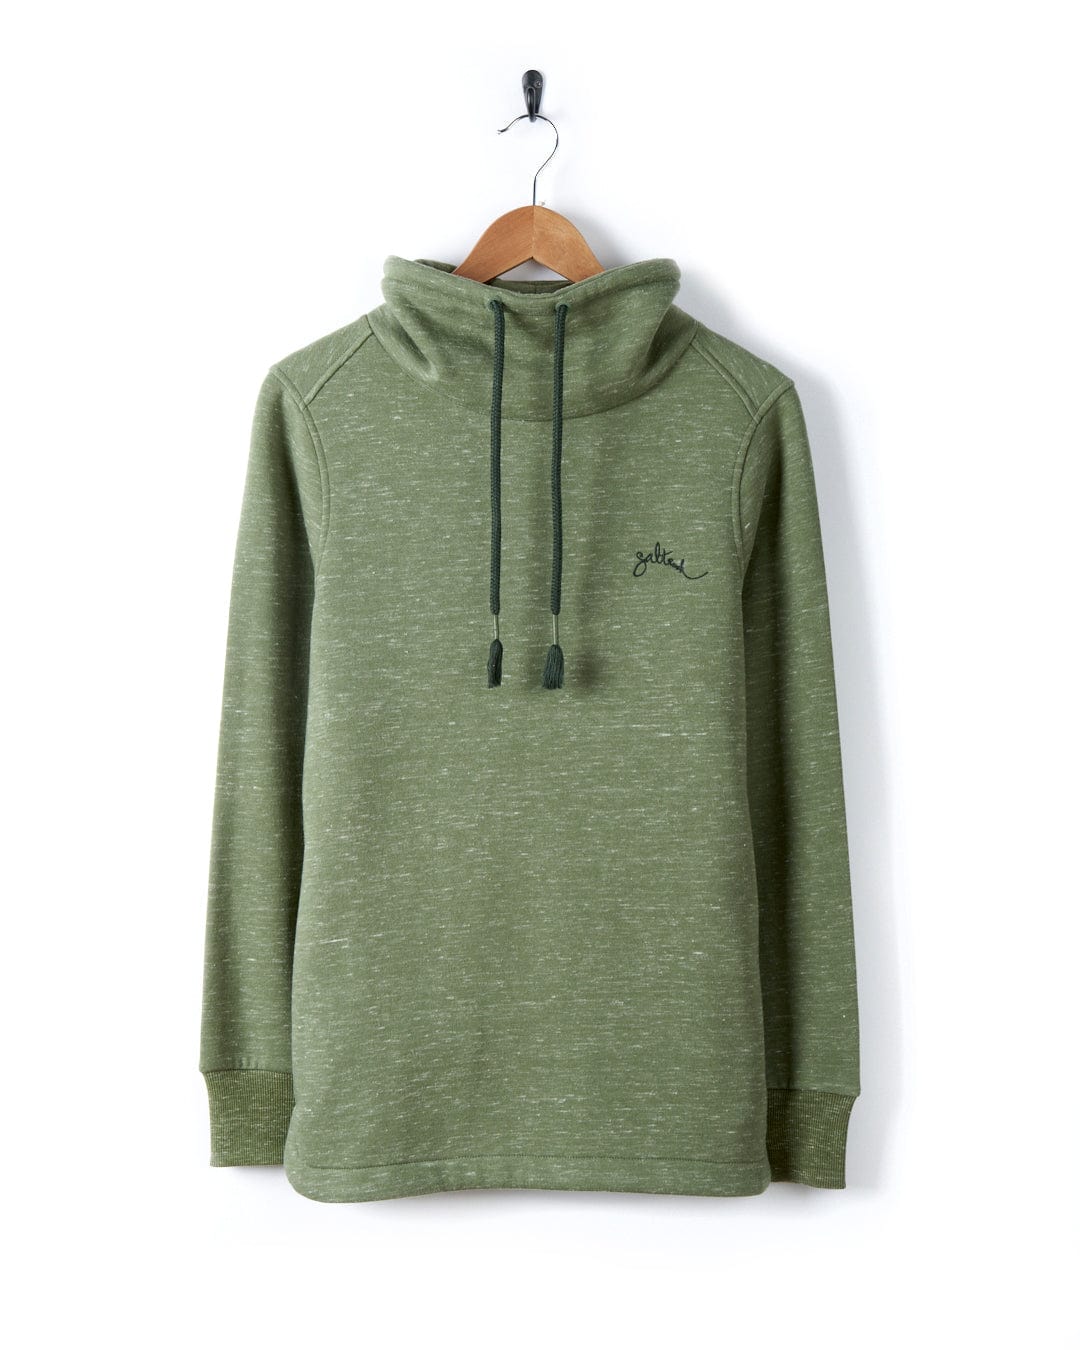 A Saltrock green sweater with embroidered branding on the Harper - Womens Longline Pop Sweat fit.